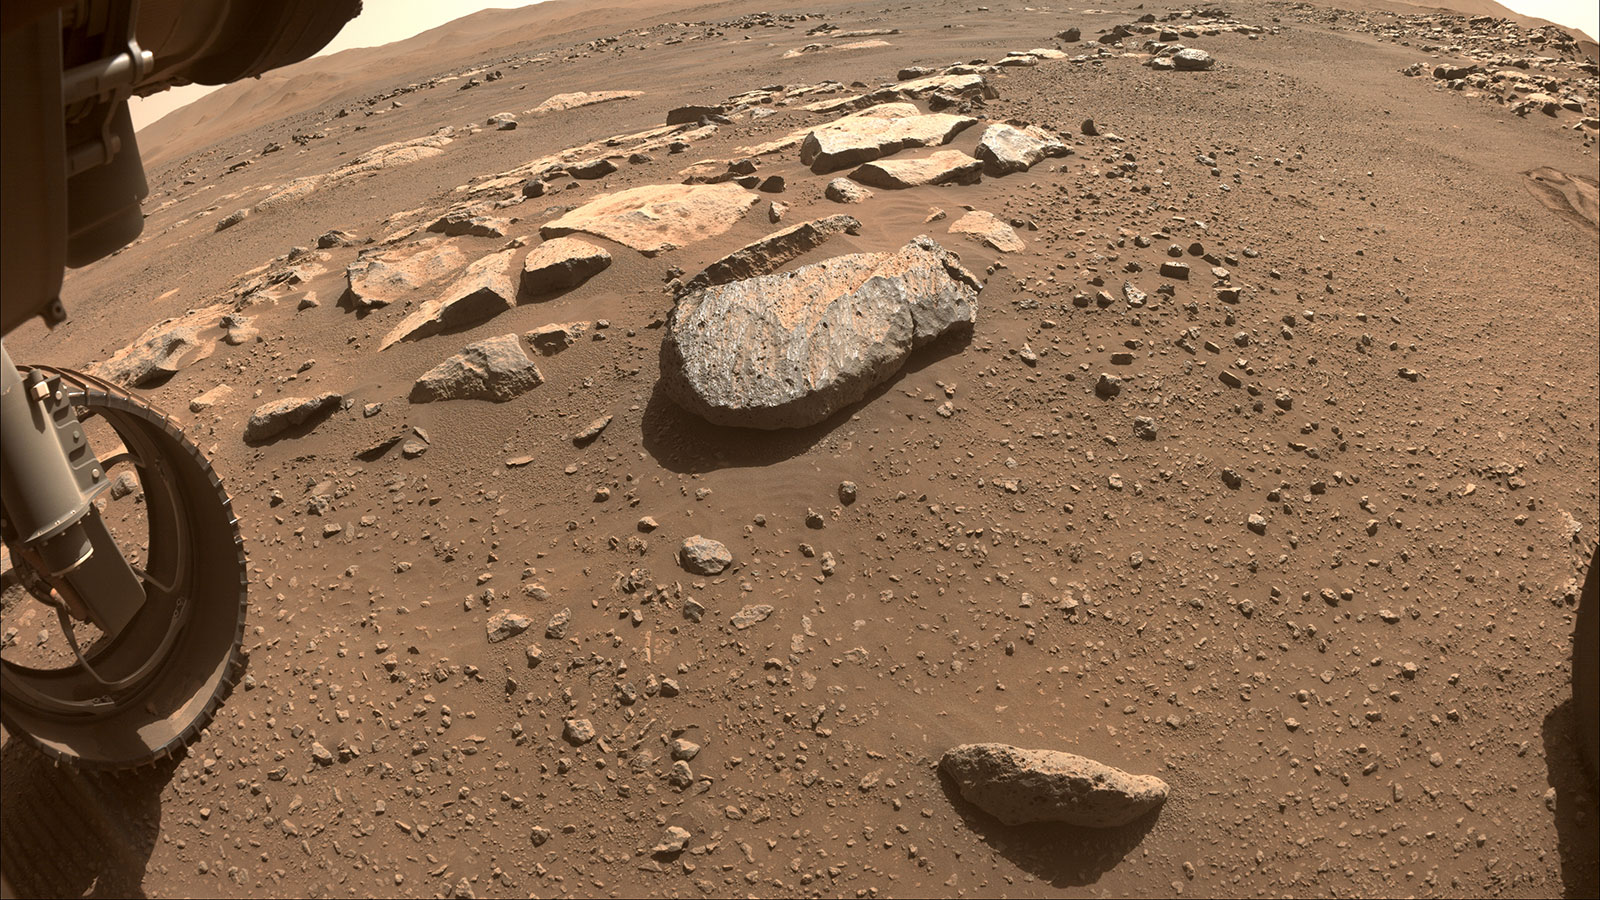 NASA’s Perseverance Mars rover will abrade the rock at the center of this image